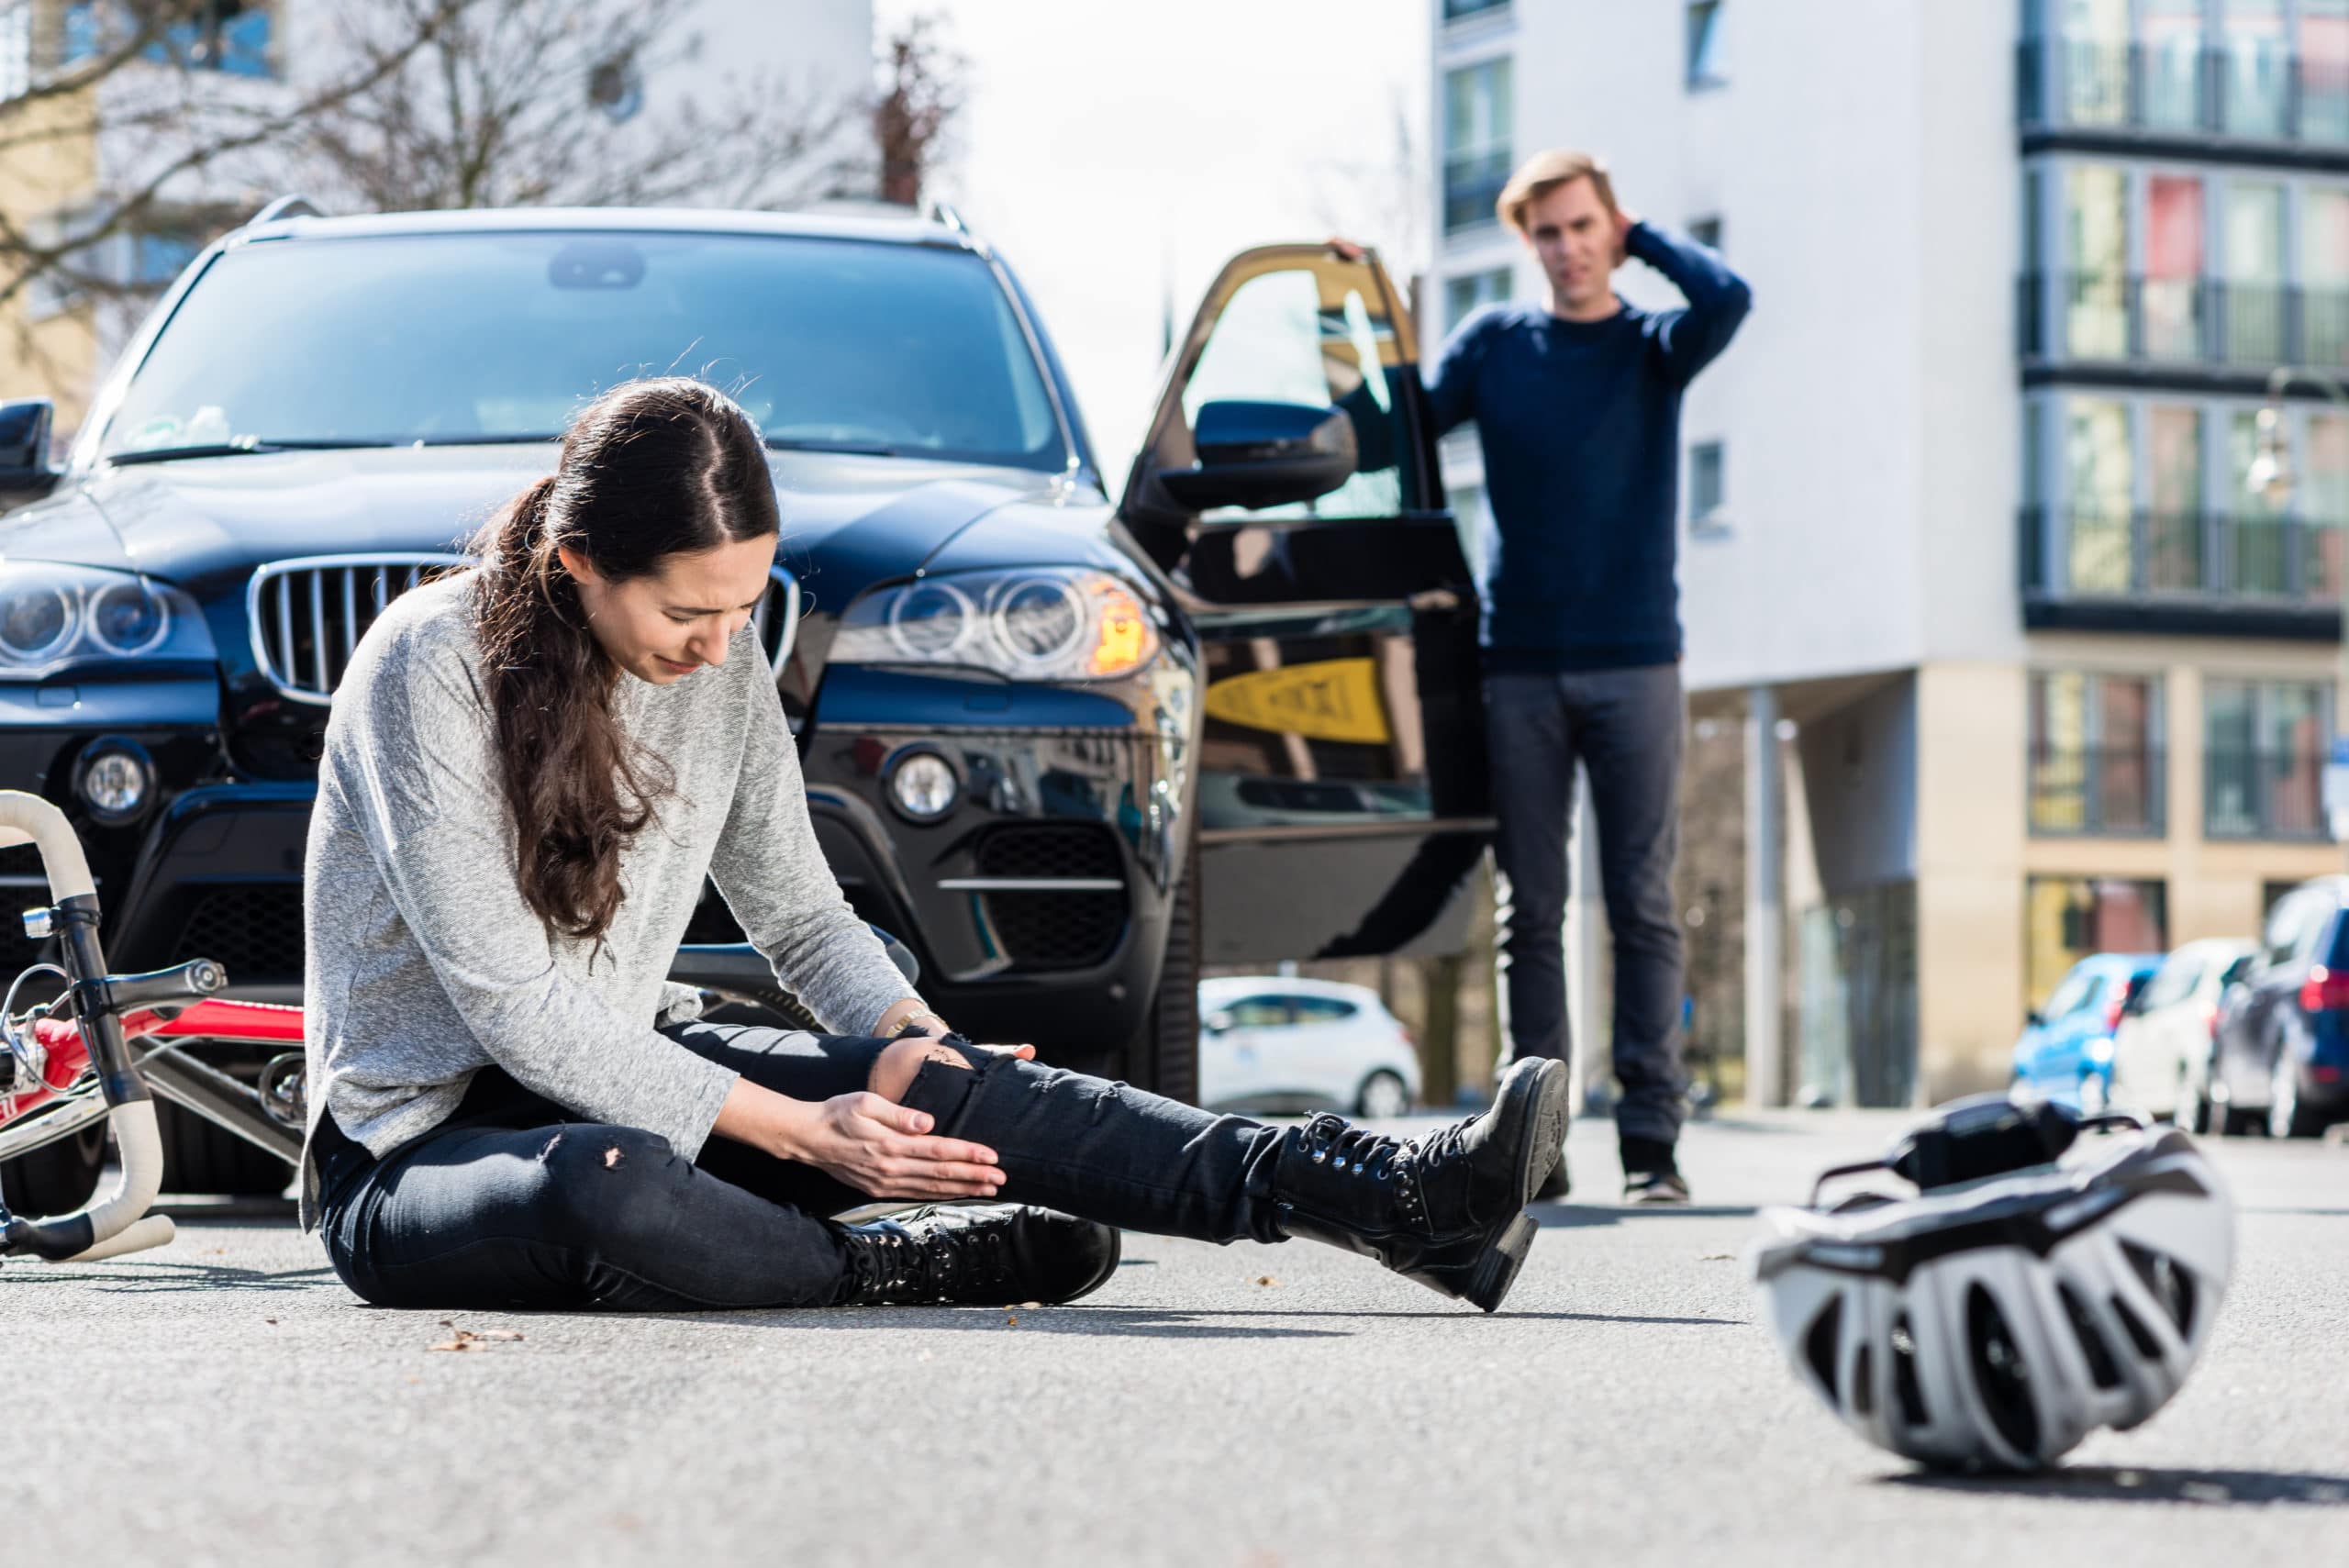 Questions to ask injury attorney after a car accident